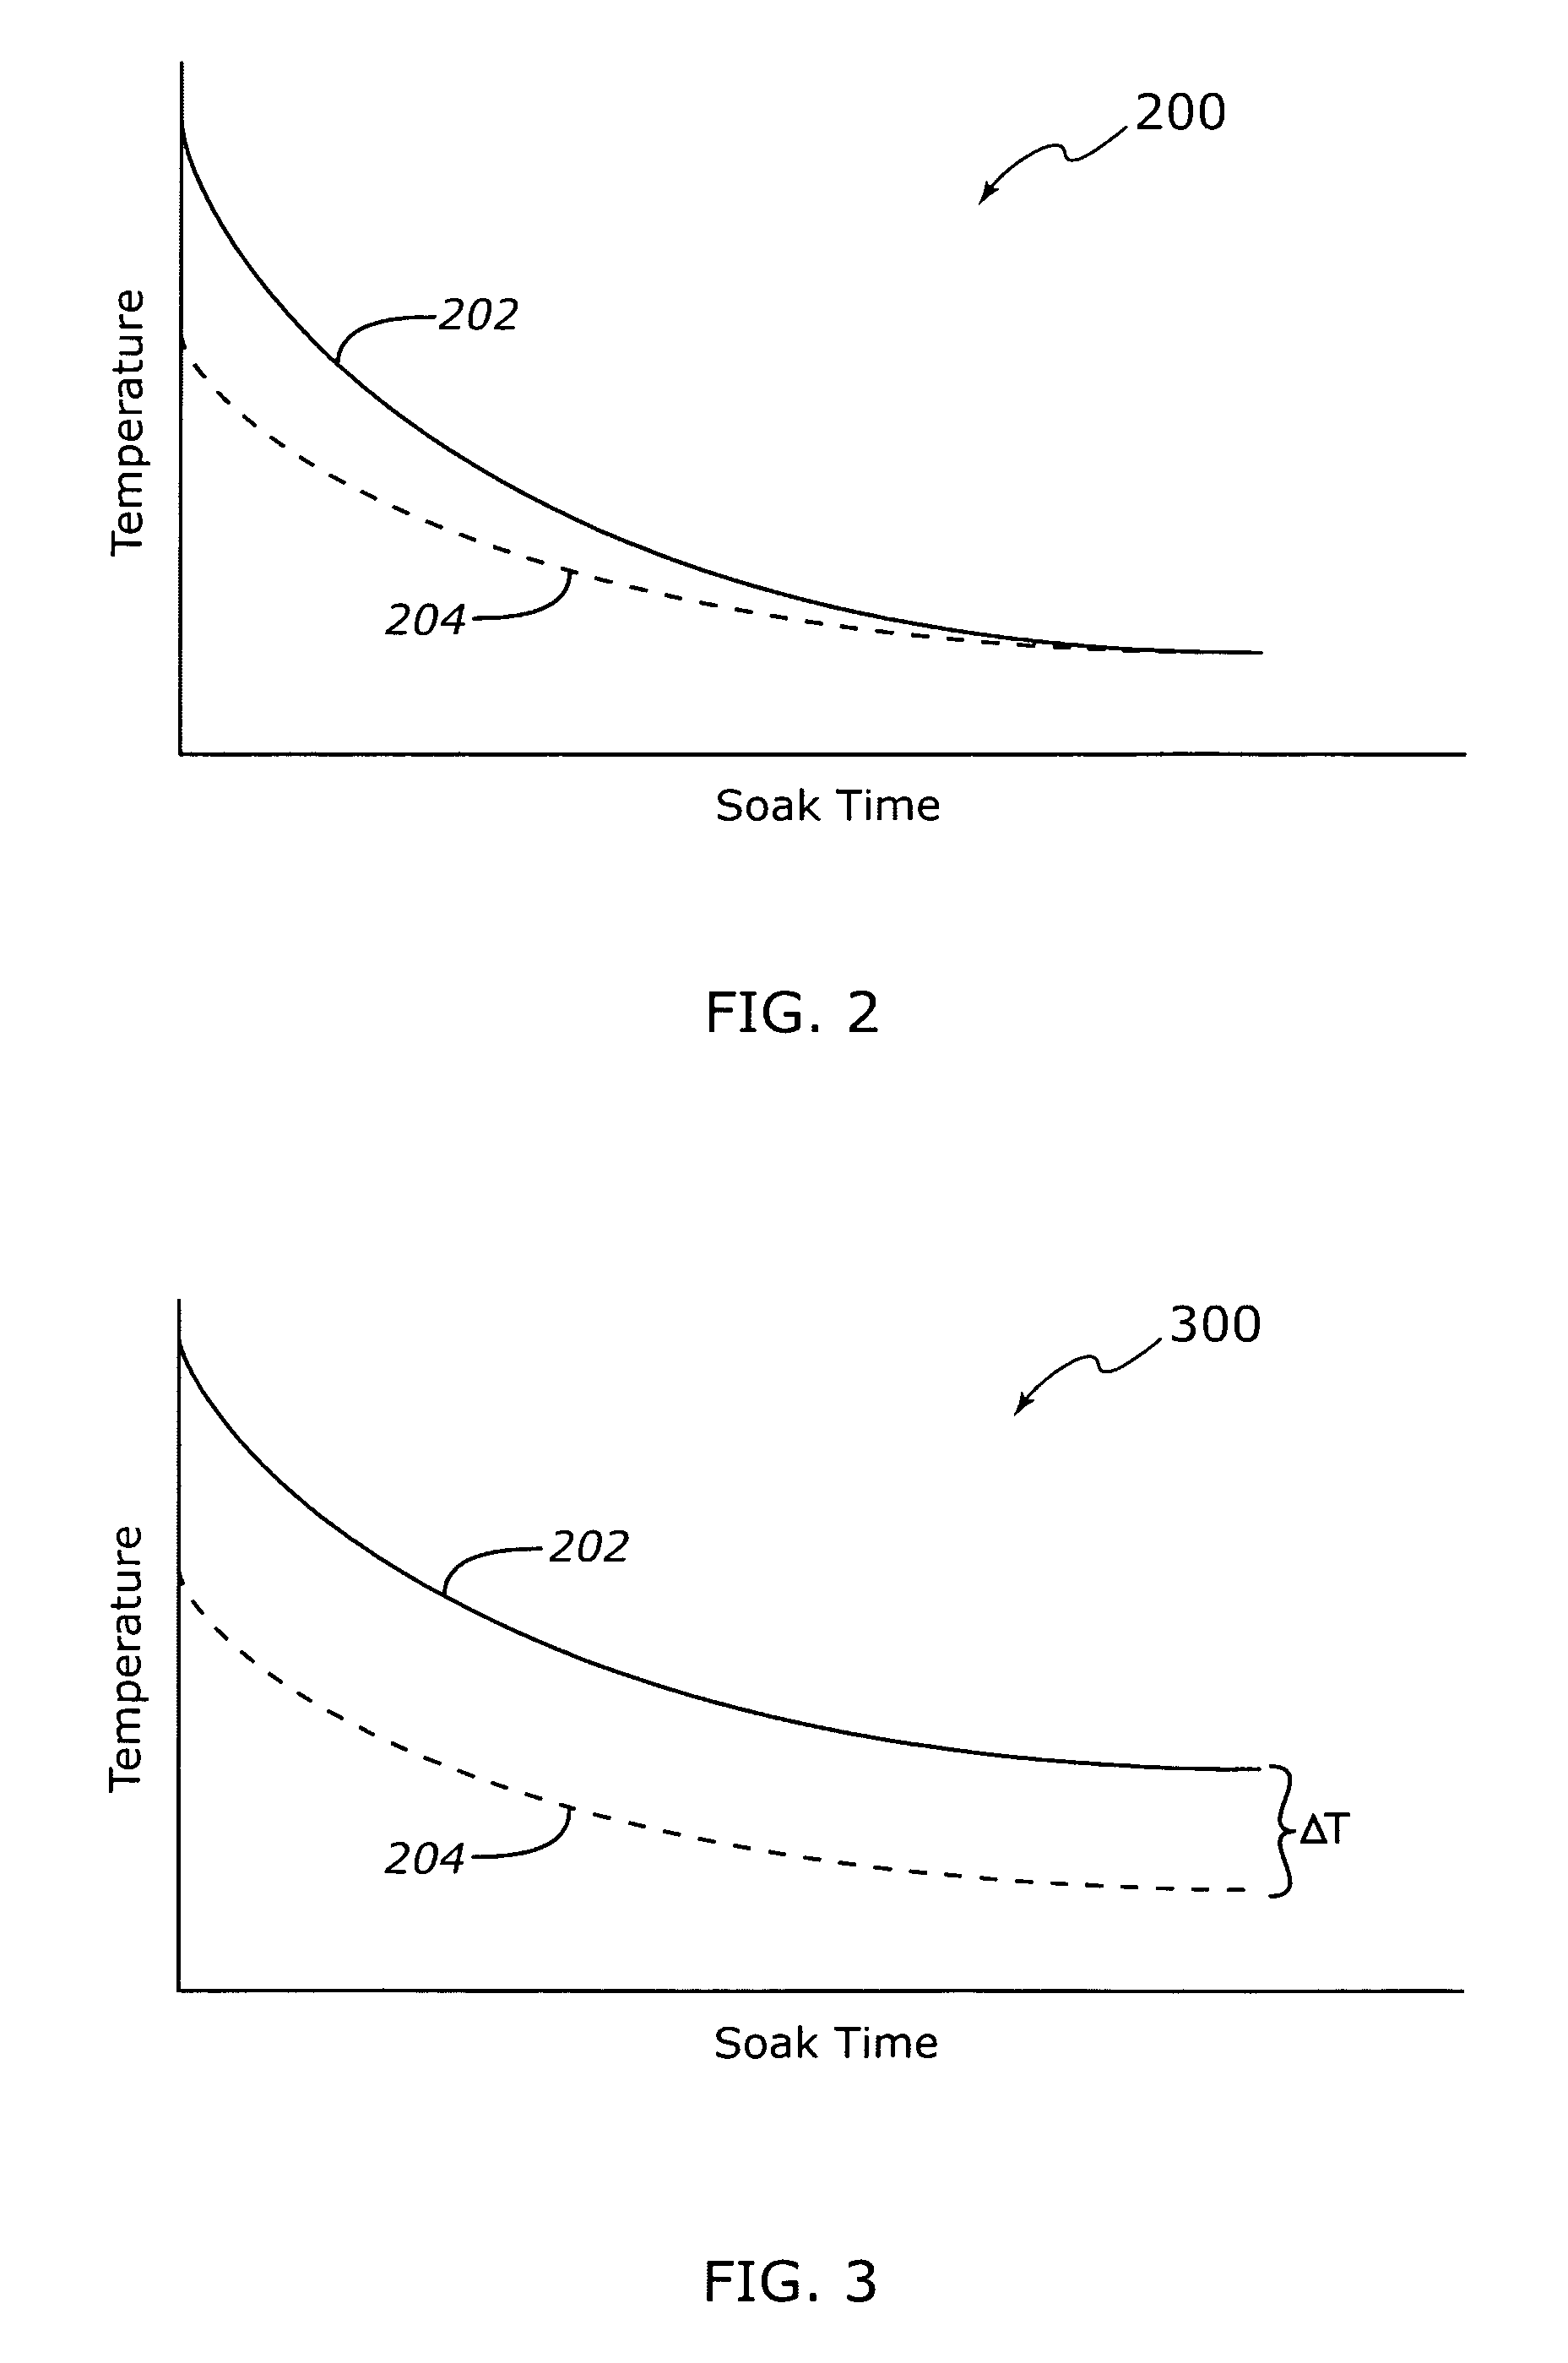 Method and apparatus for determining coolant temperature rationally in a motor vehicle